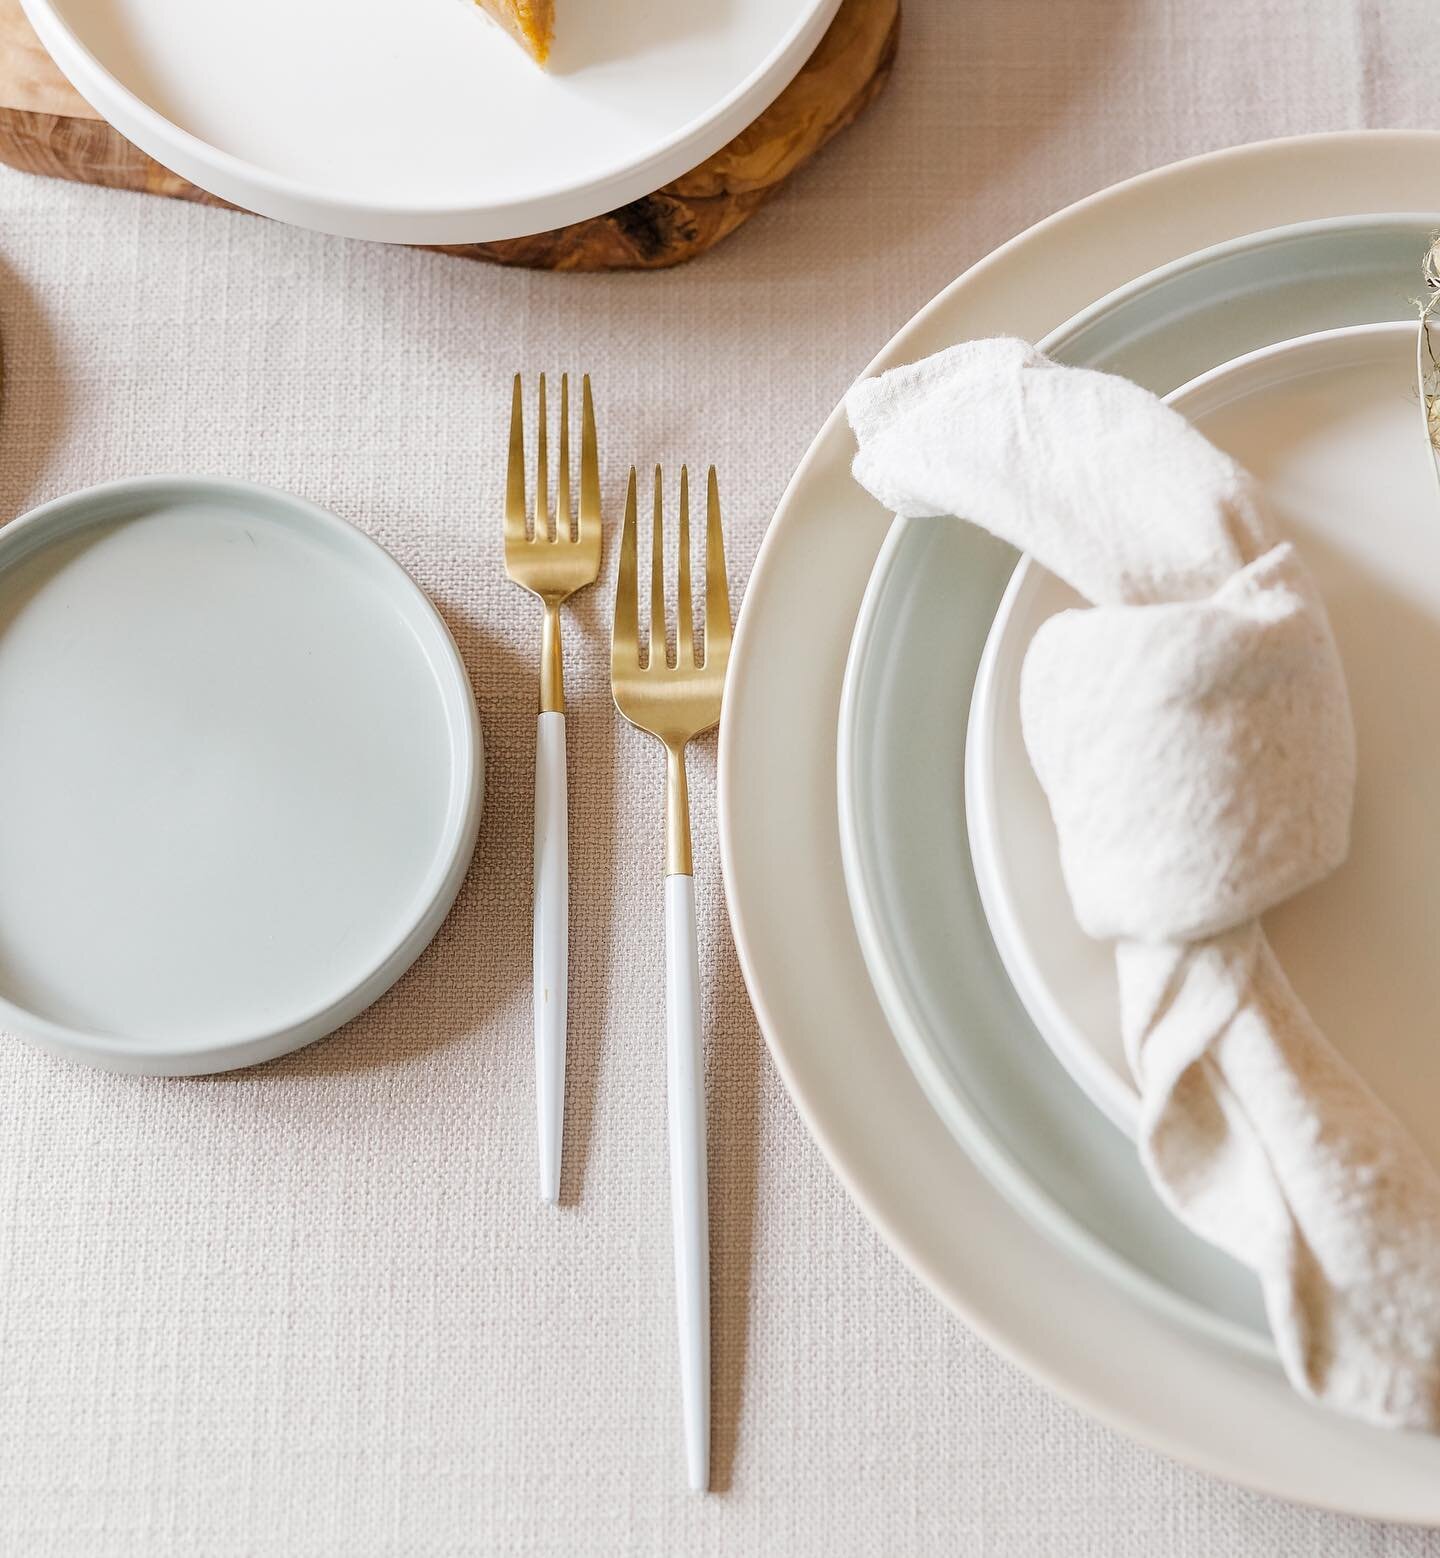 Up close and personal with a few of our favourite things! 

Featuring our Willow dinner set with white &amp; sage green, our Madeline flatware &amp; Beige linen napkin!